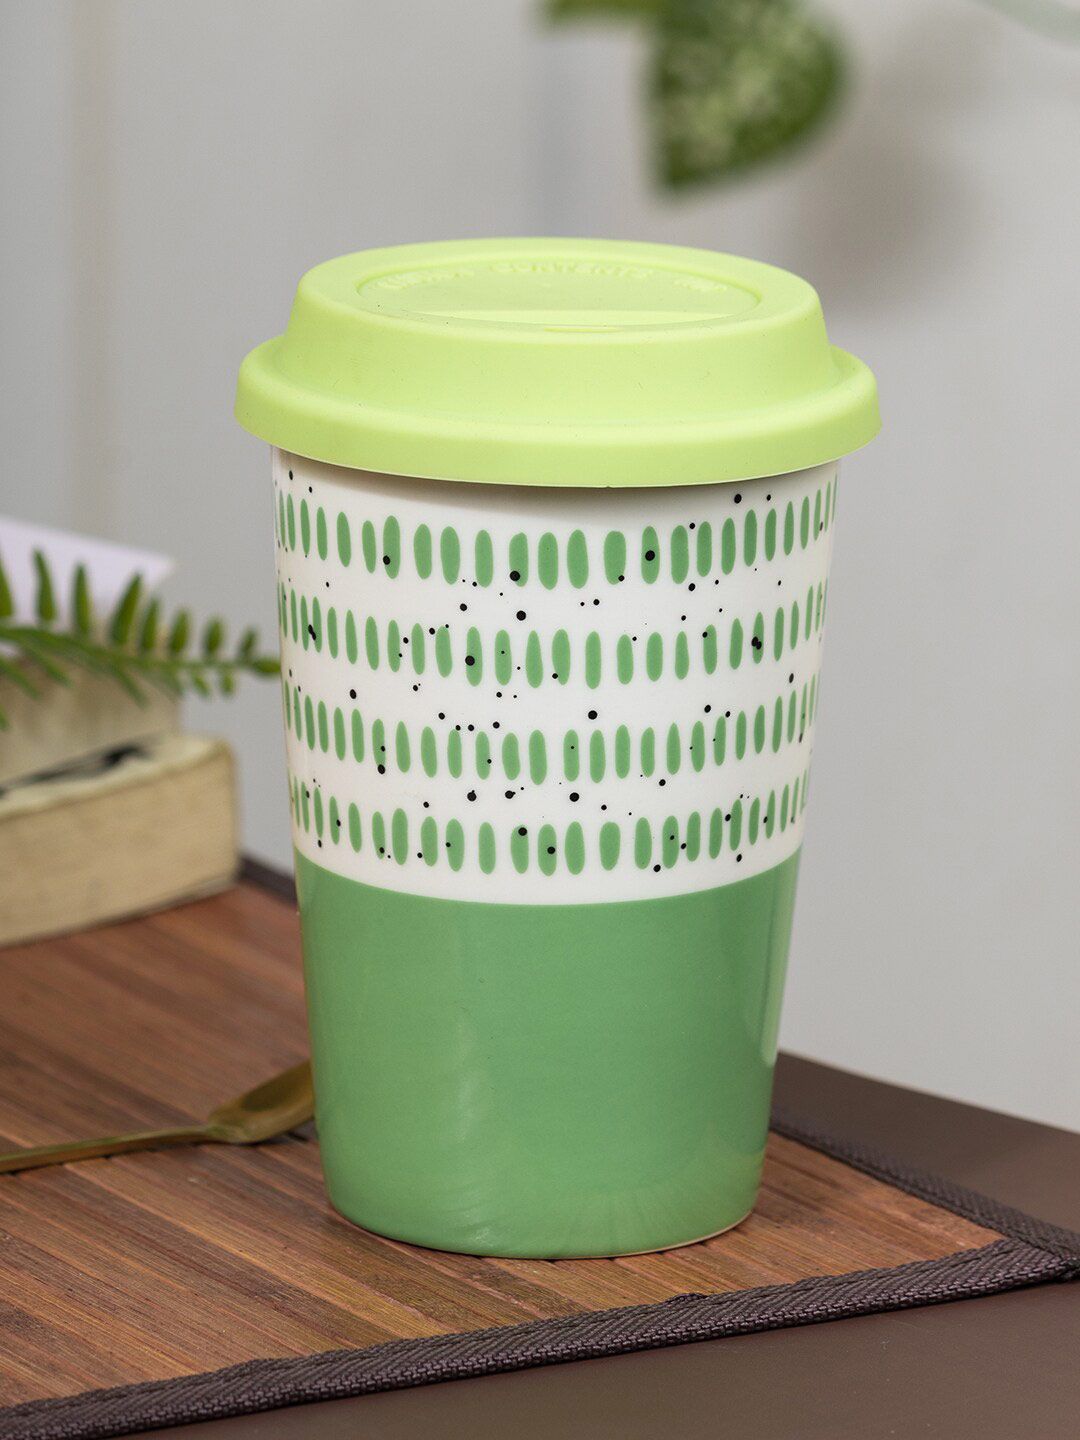 MARKET99 Green & White Printed Ceramic Glossy Mug With Lid Price in India